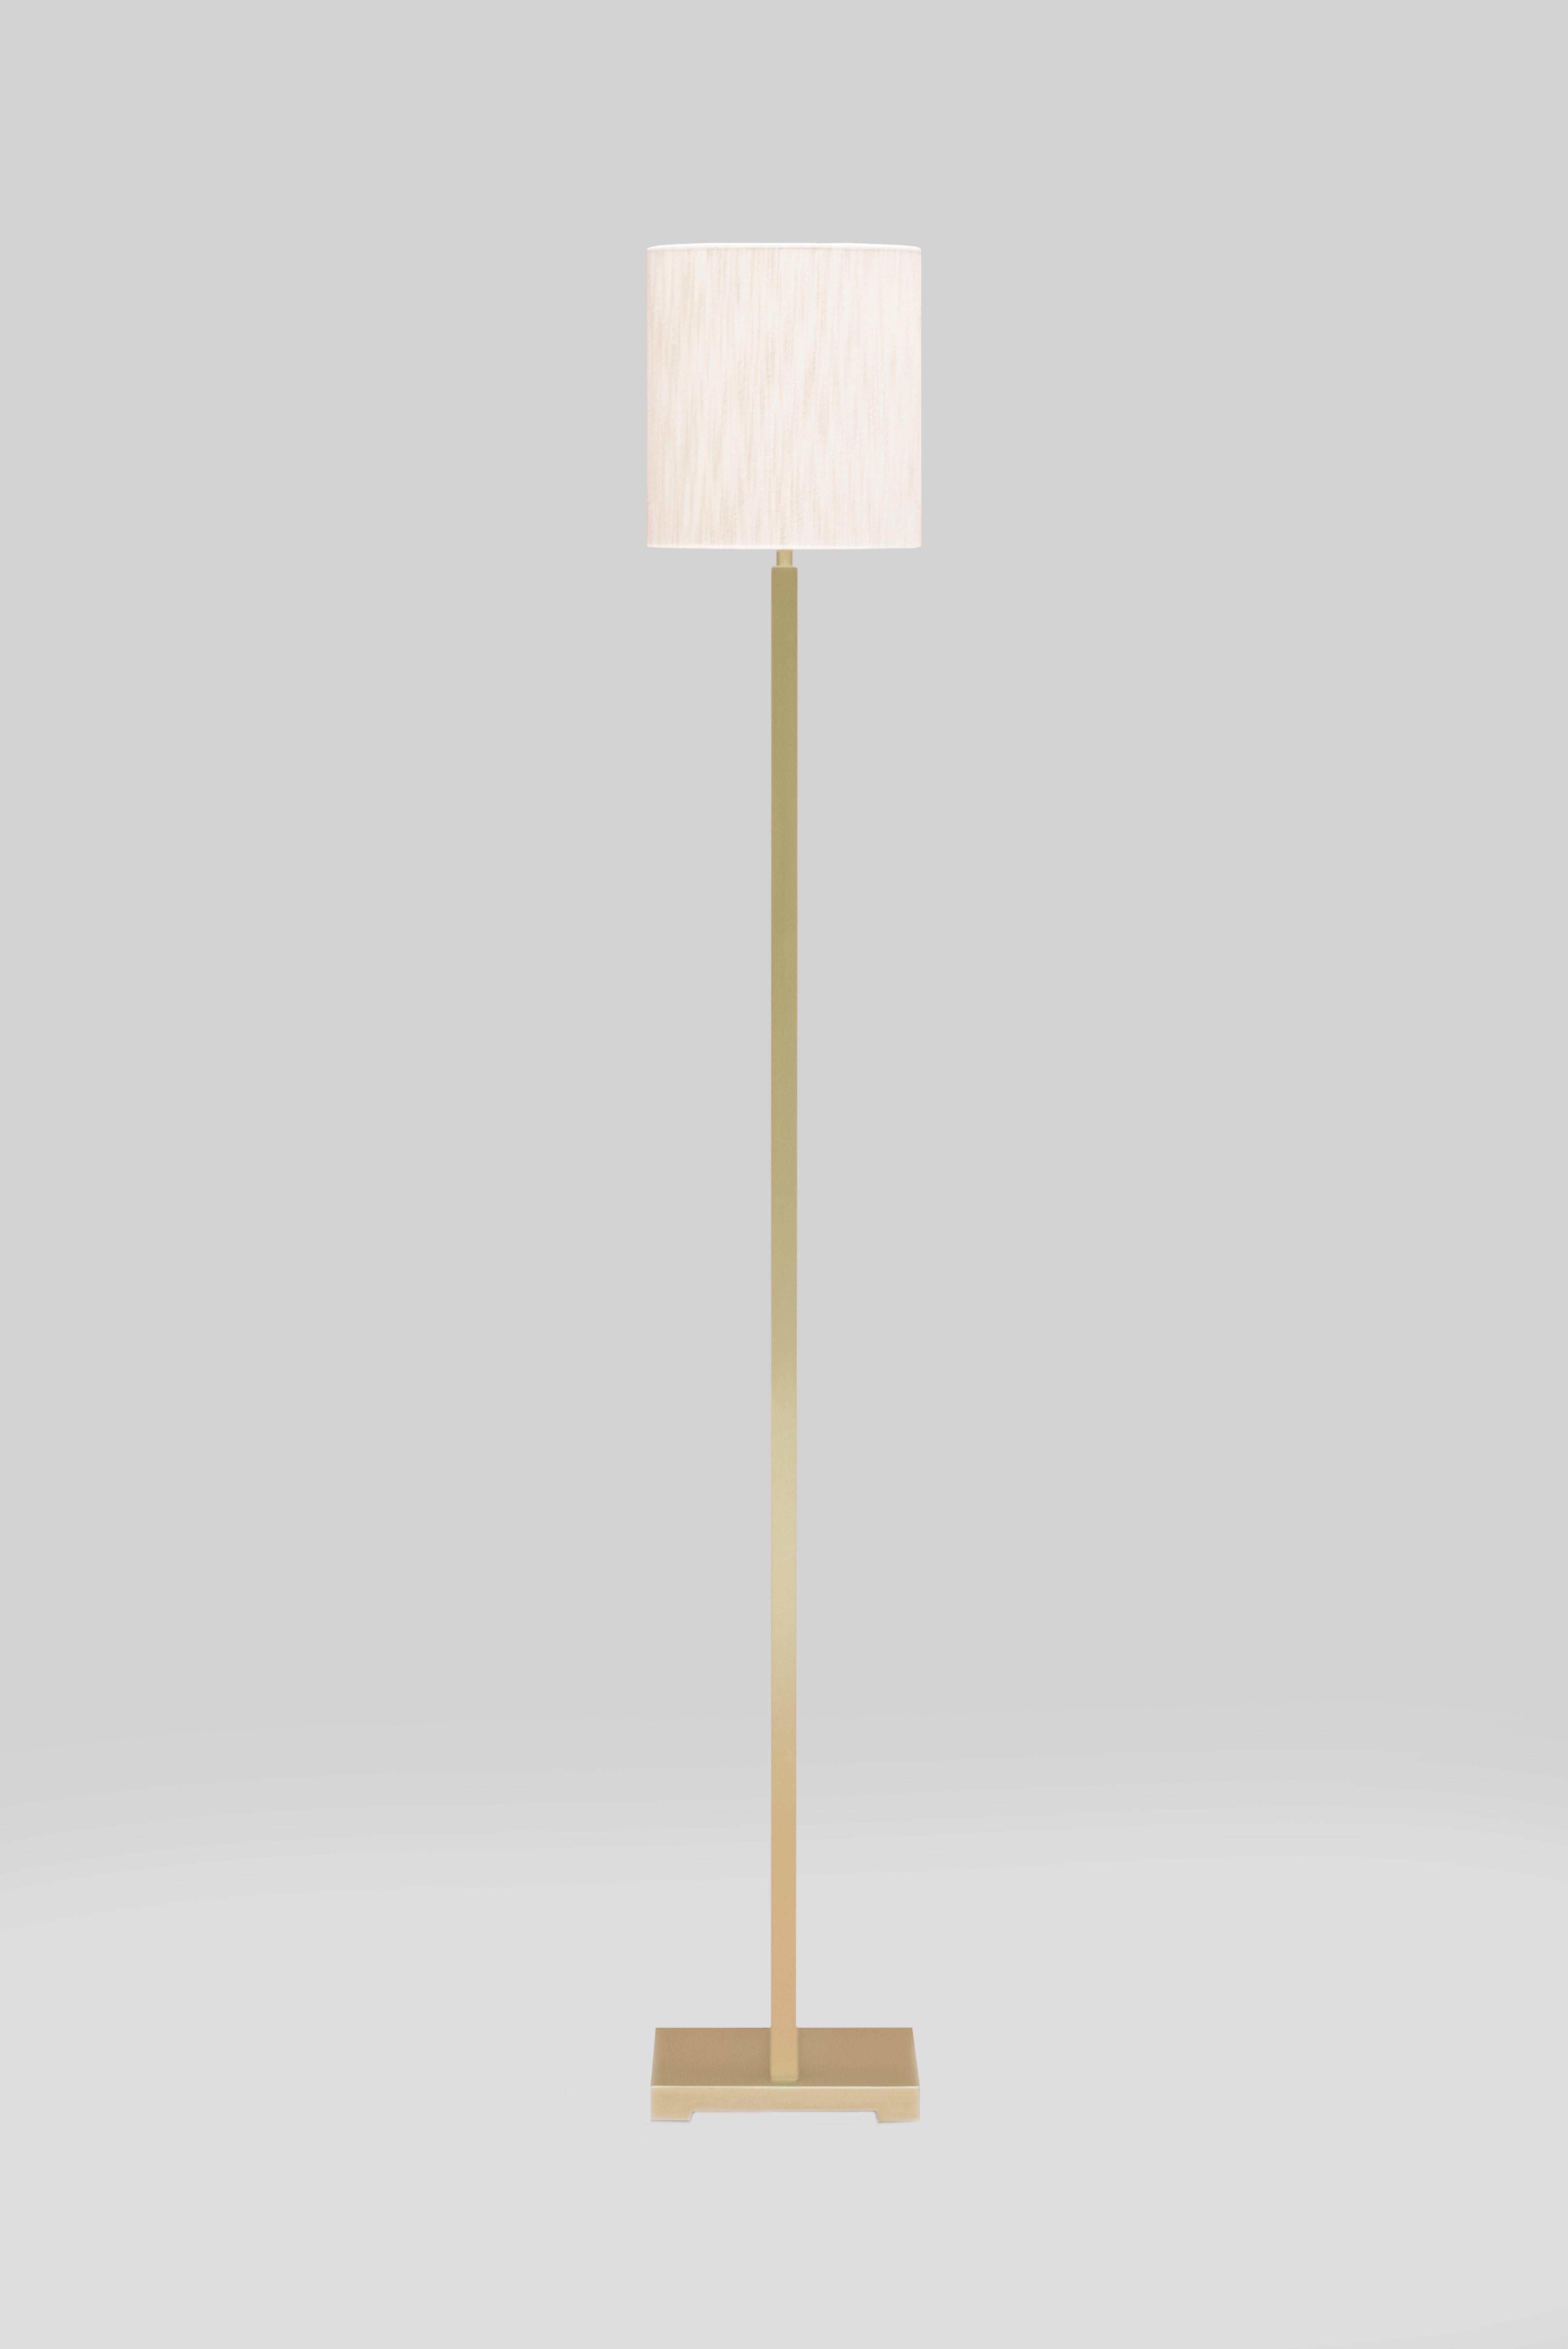 This 21st century modern Lotis MW24 floor lamp was designed by Peter Ghyczy in 2010 and hand-crafted in the GHYCZY atelier in the South of the Netherlands, with a select group of artisans. The floor lamp features a rose tinted oval shaped fabric